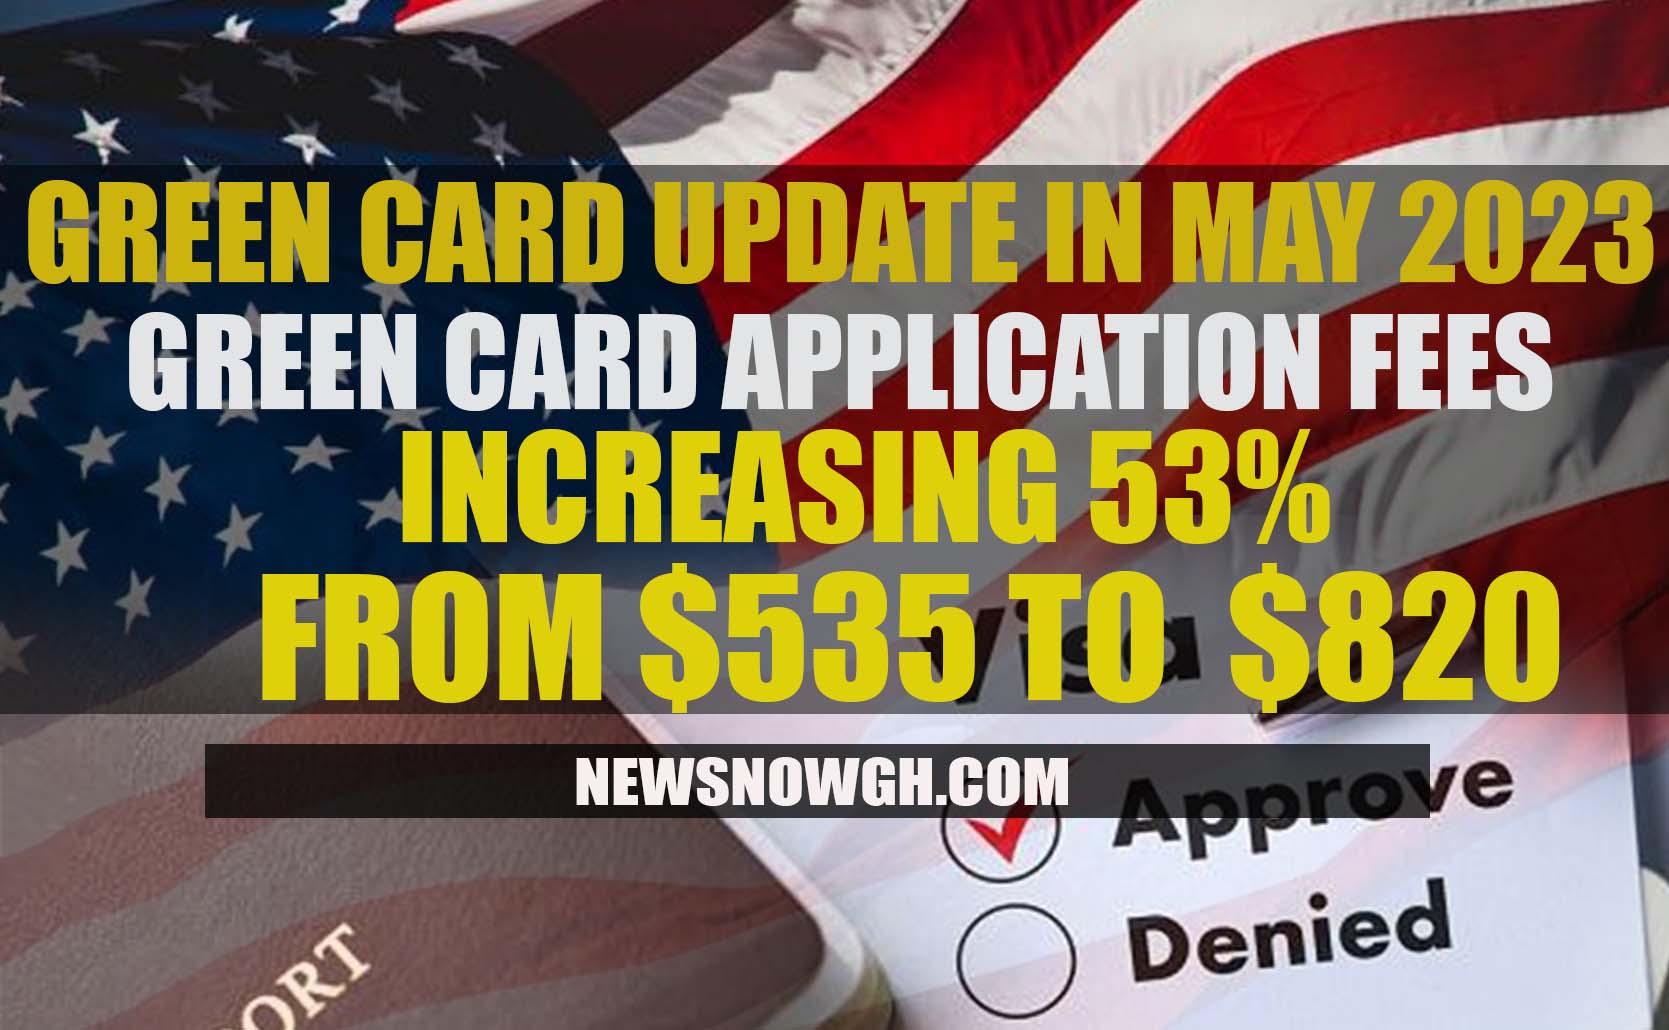 GREEN CARD UPDATE IN MAY 2023